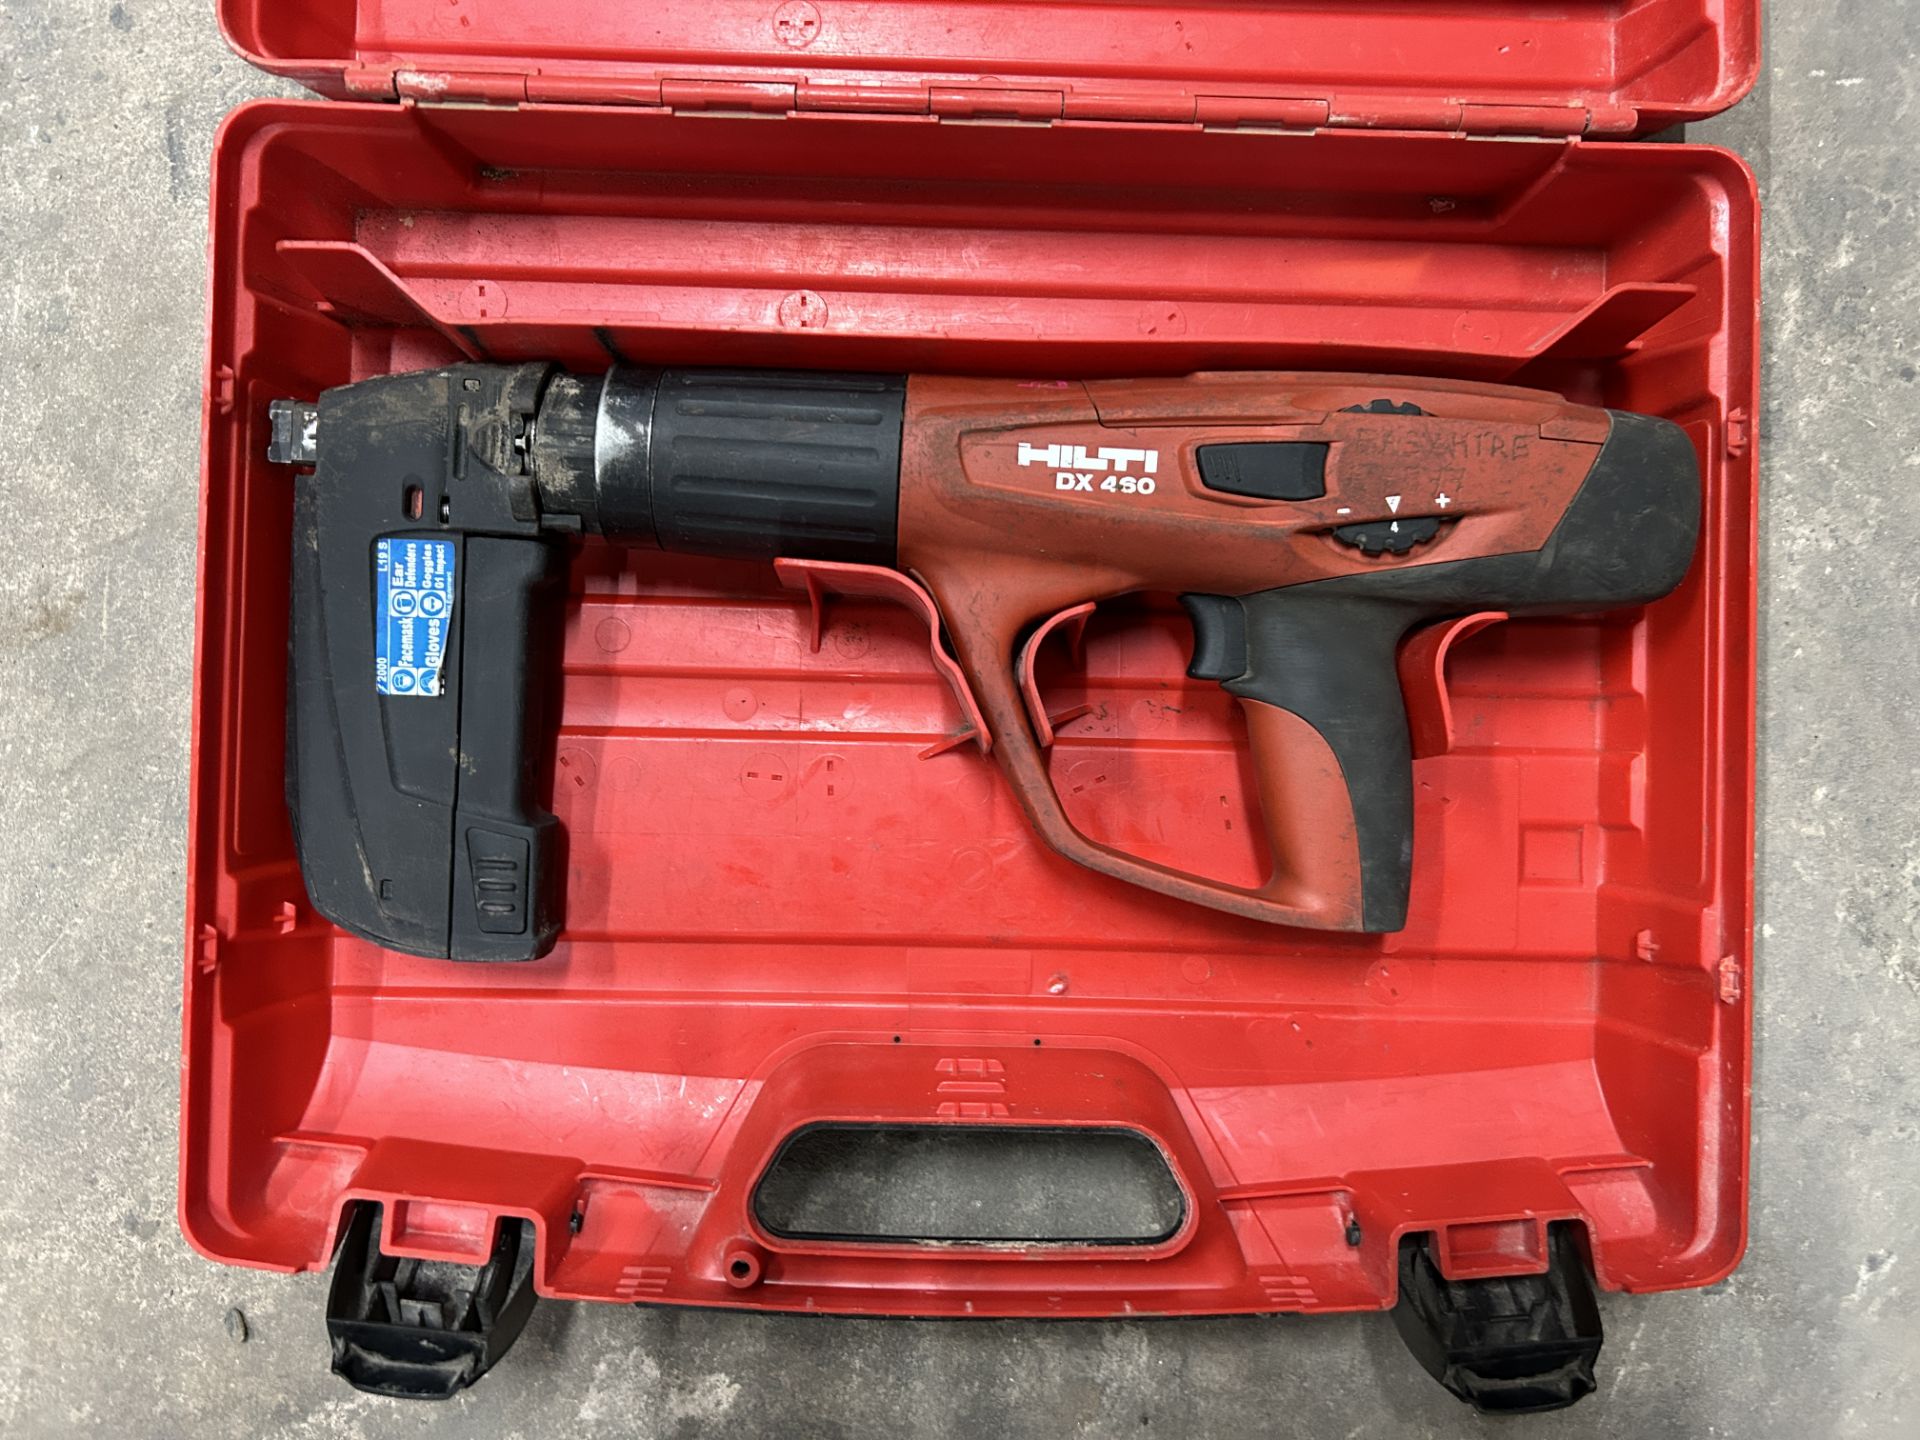 Hilti DX 460 Powder Actuated Nail Gun in Case - Image 2 of 3